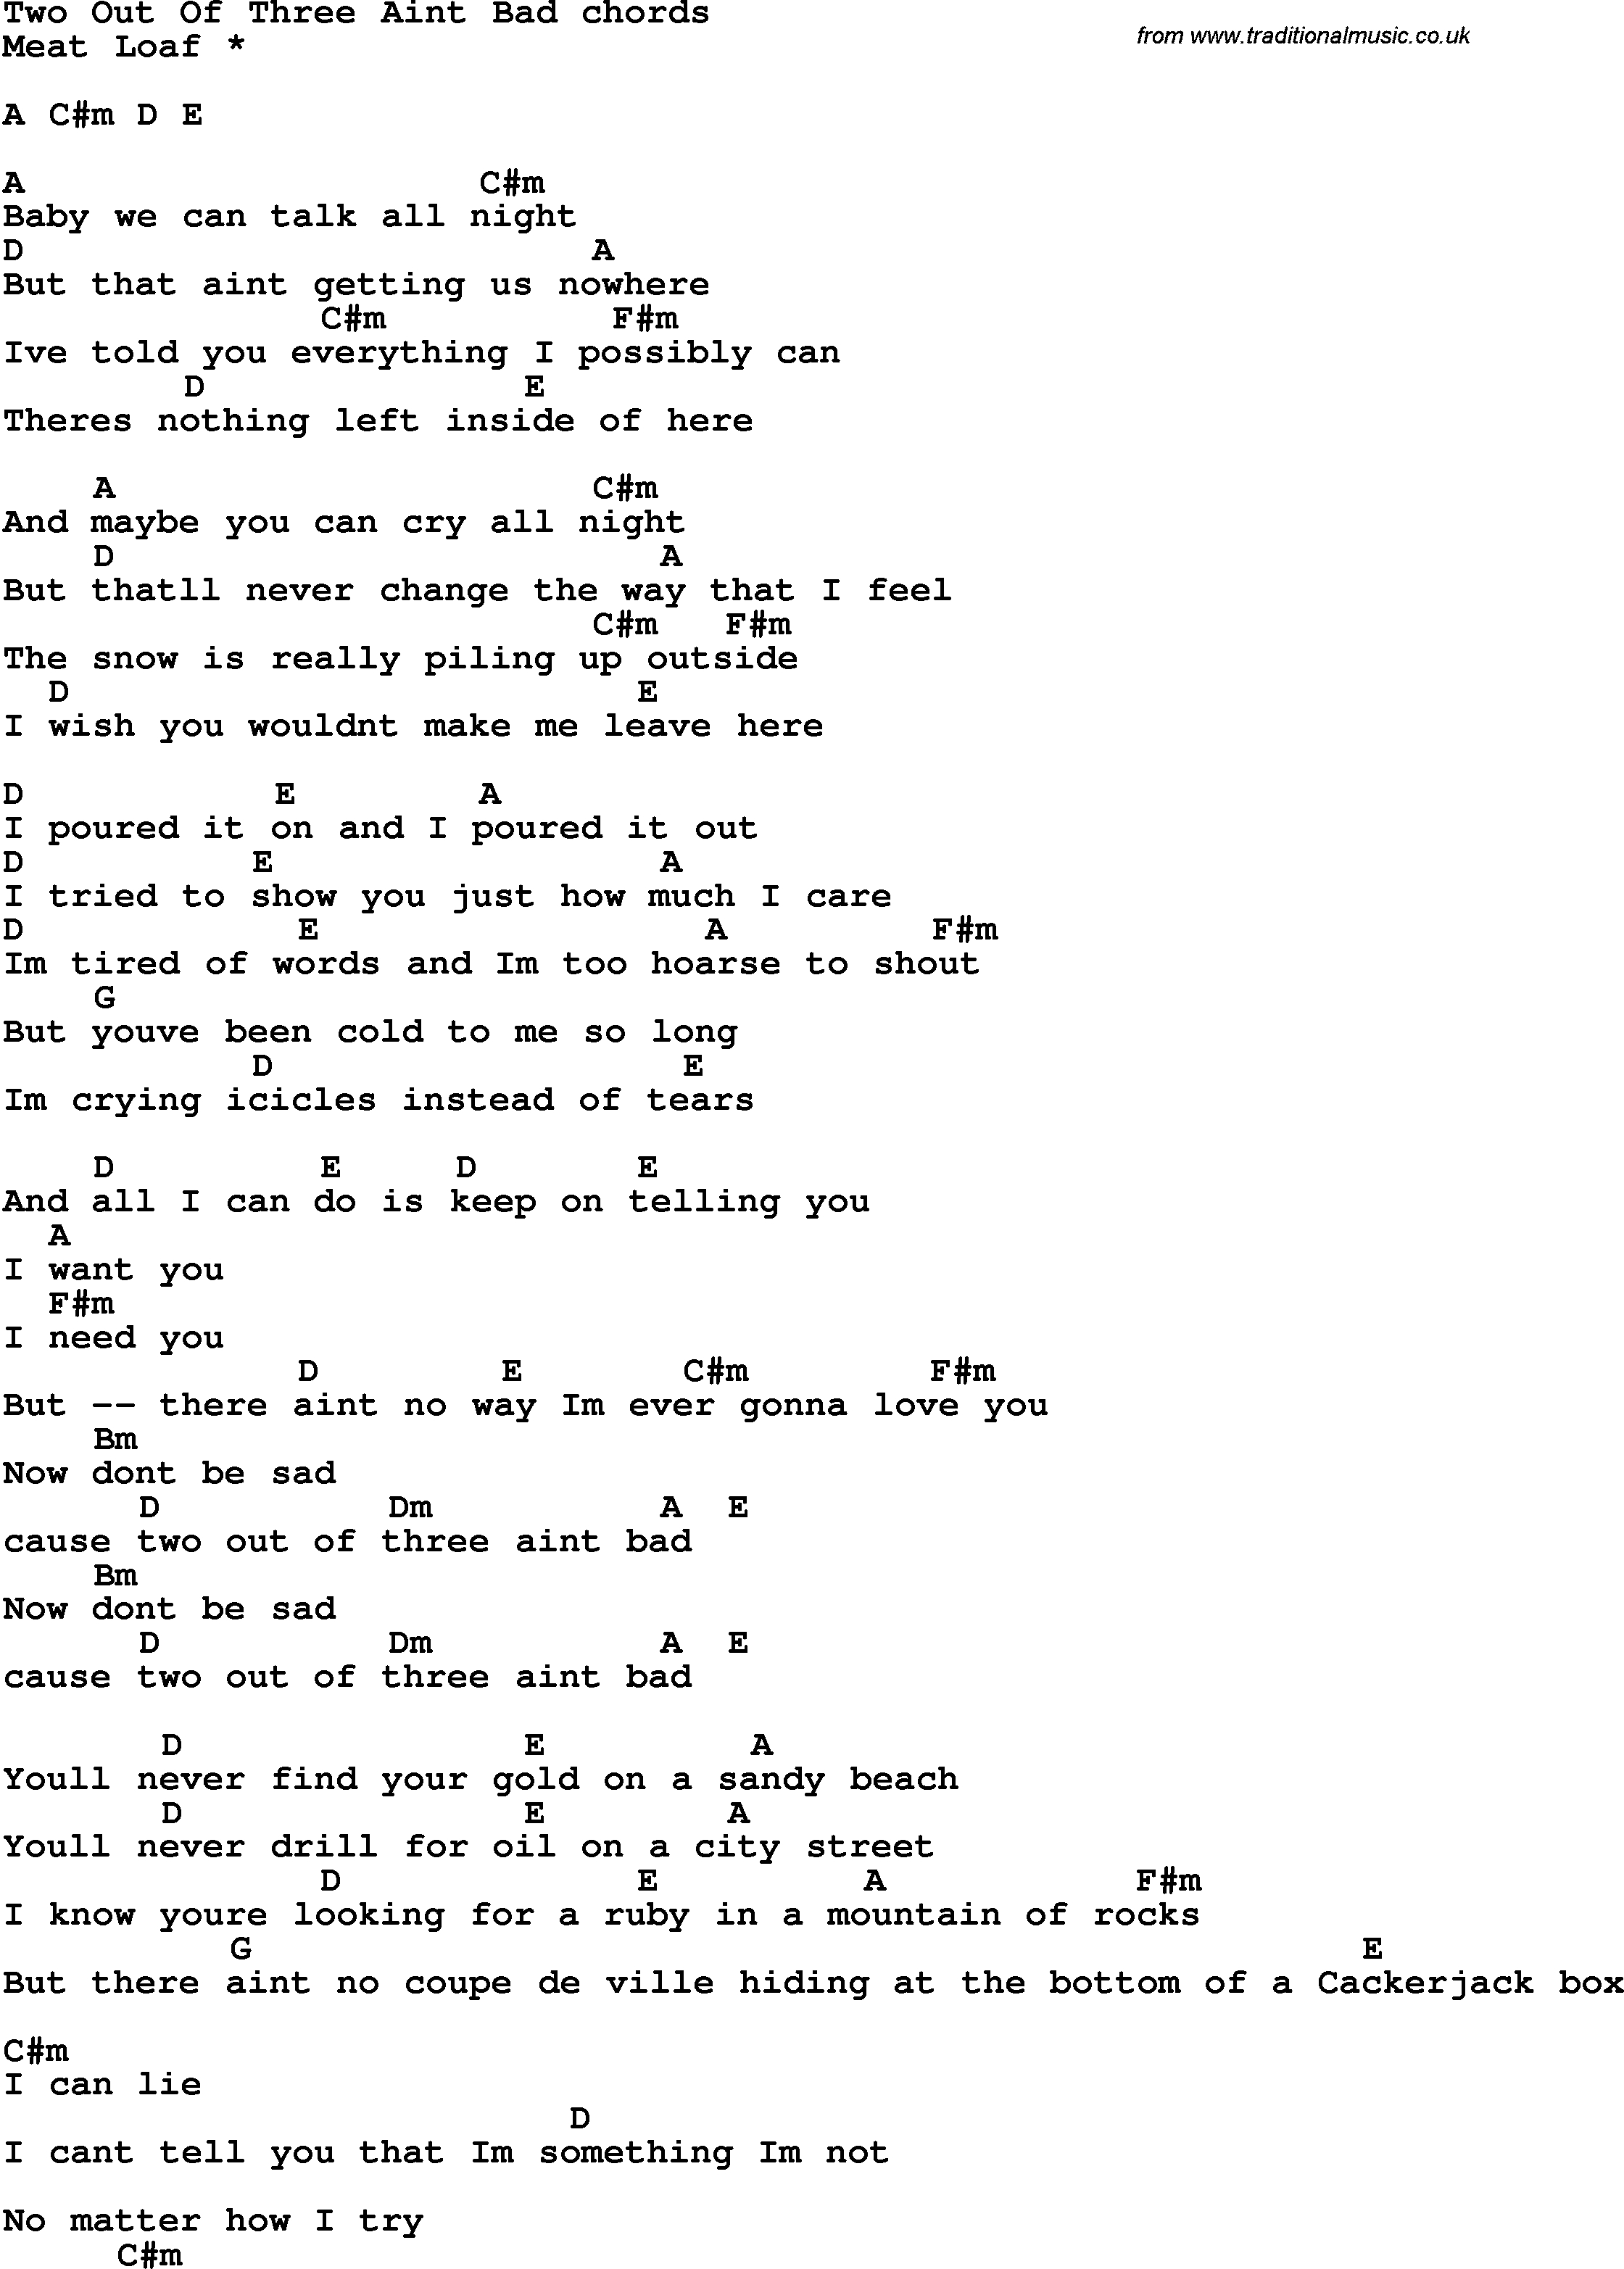 Ain T No Sunshine Chords Song Lyrics With Guitar Chords For Two Out Of Three Aint Bad